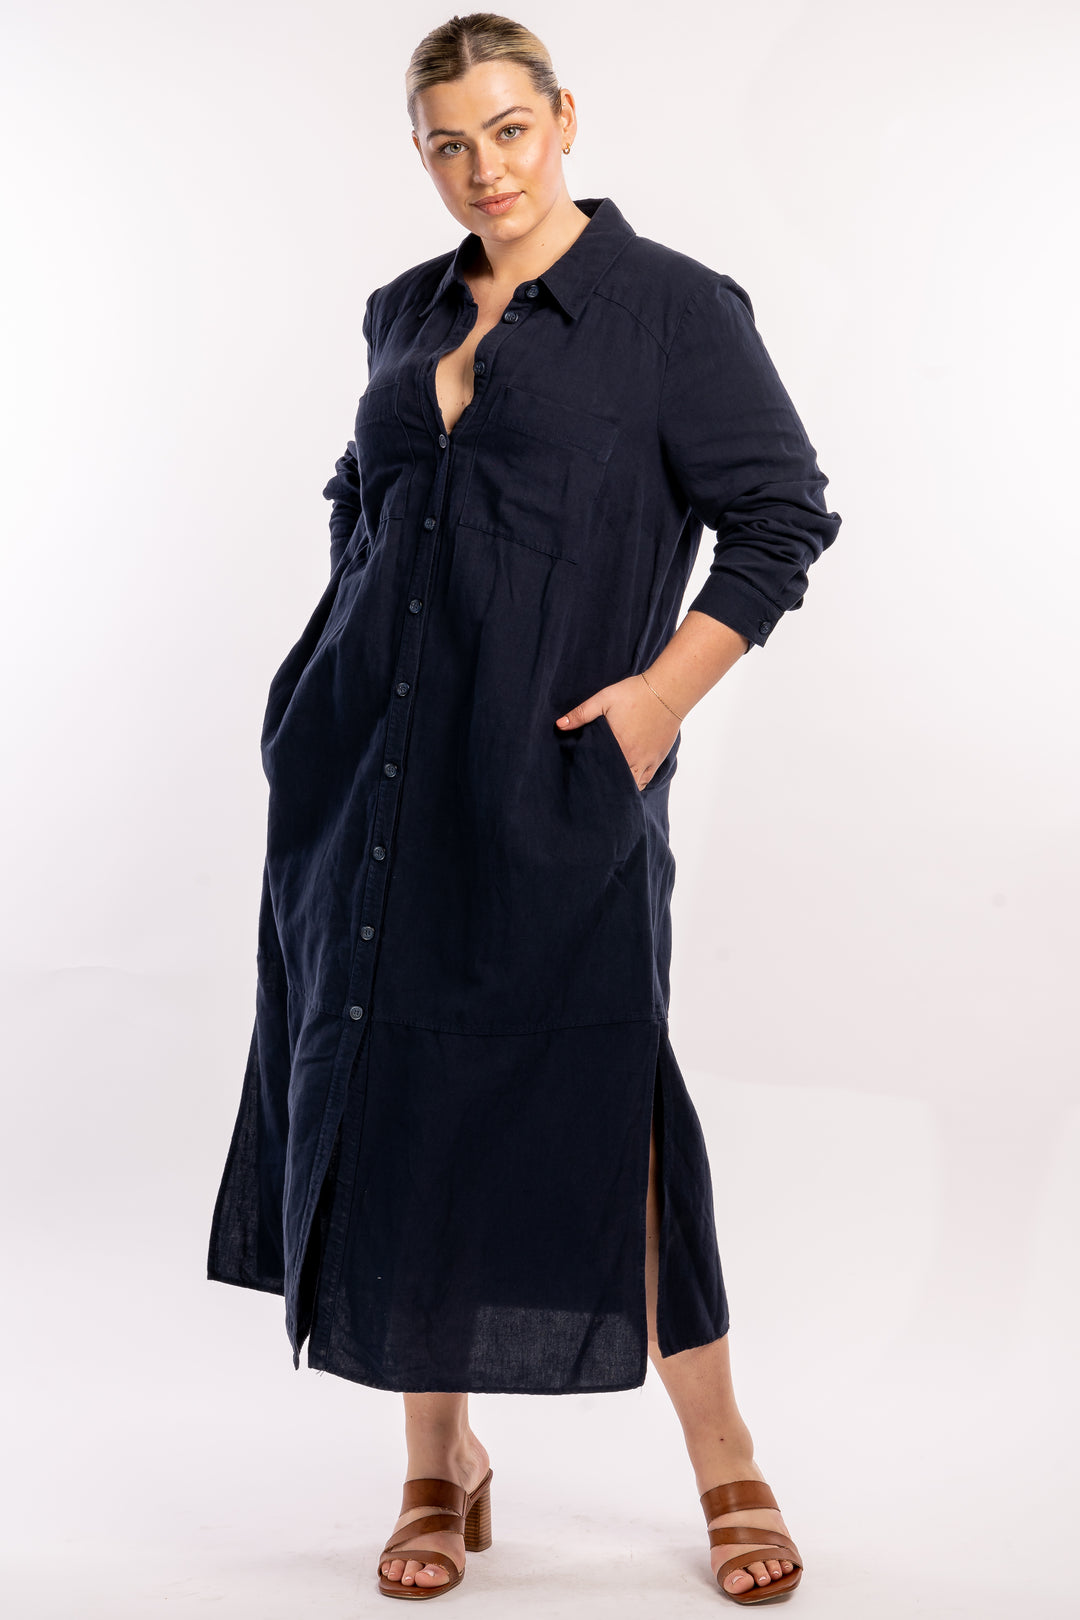 Sweet Dreams Linen Maxi Dress - Navy - Only available in XS & M